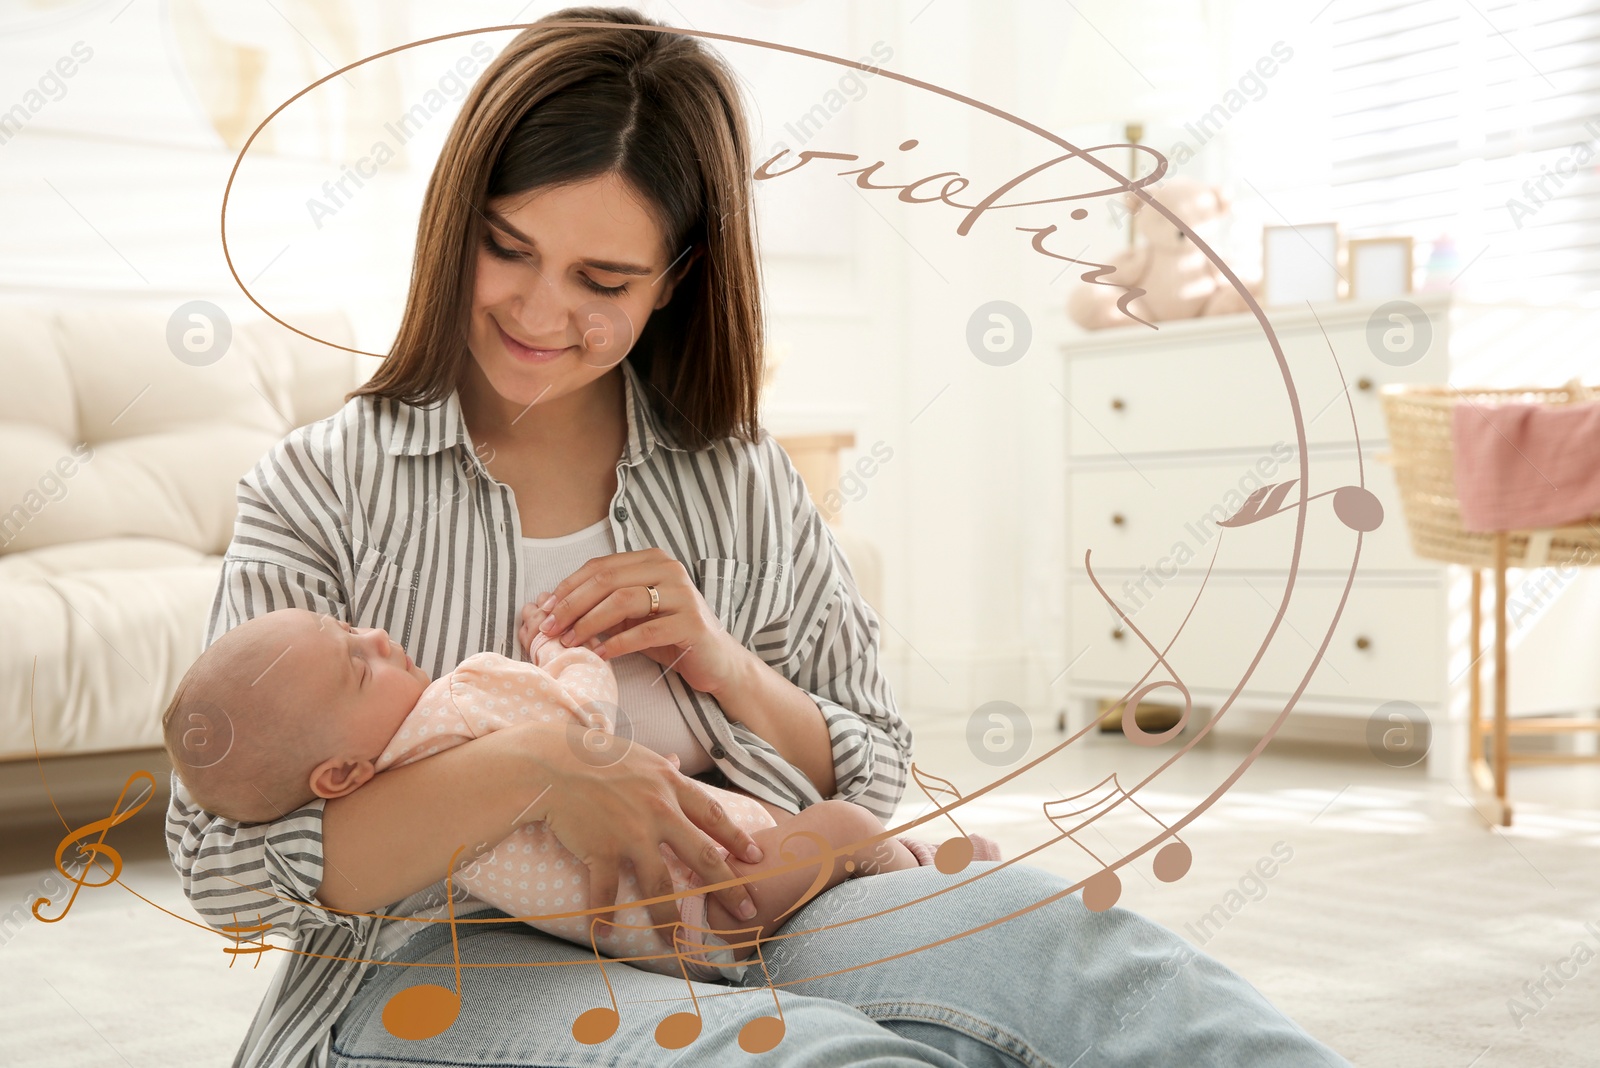 Image of Mother singing lullaby to her baby at home. Music notes illustrations flying around woman and child